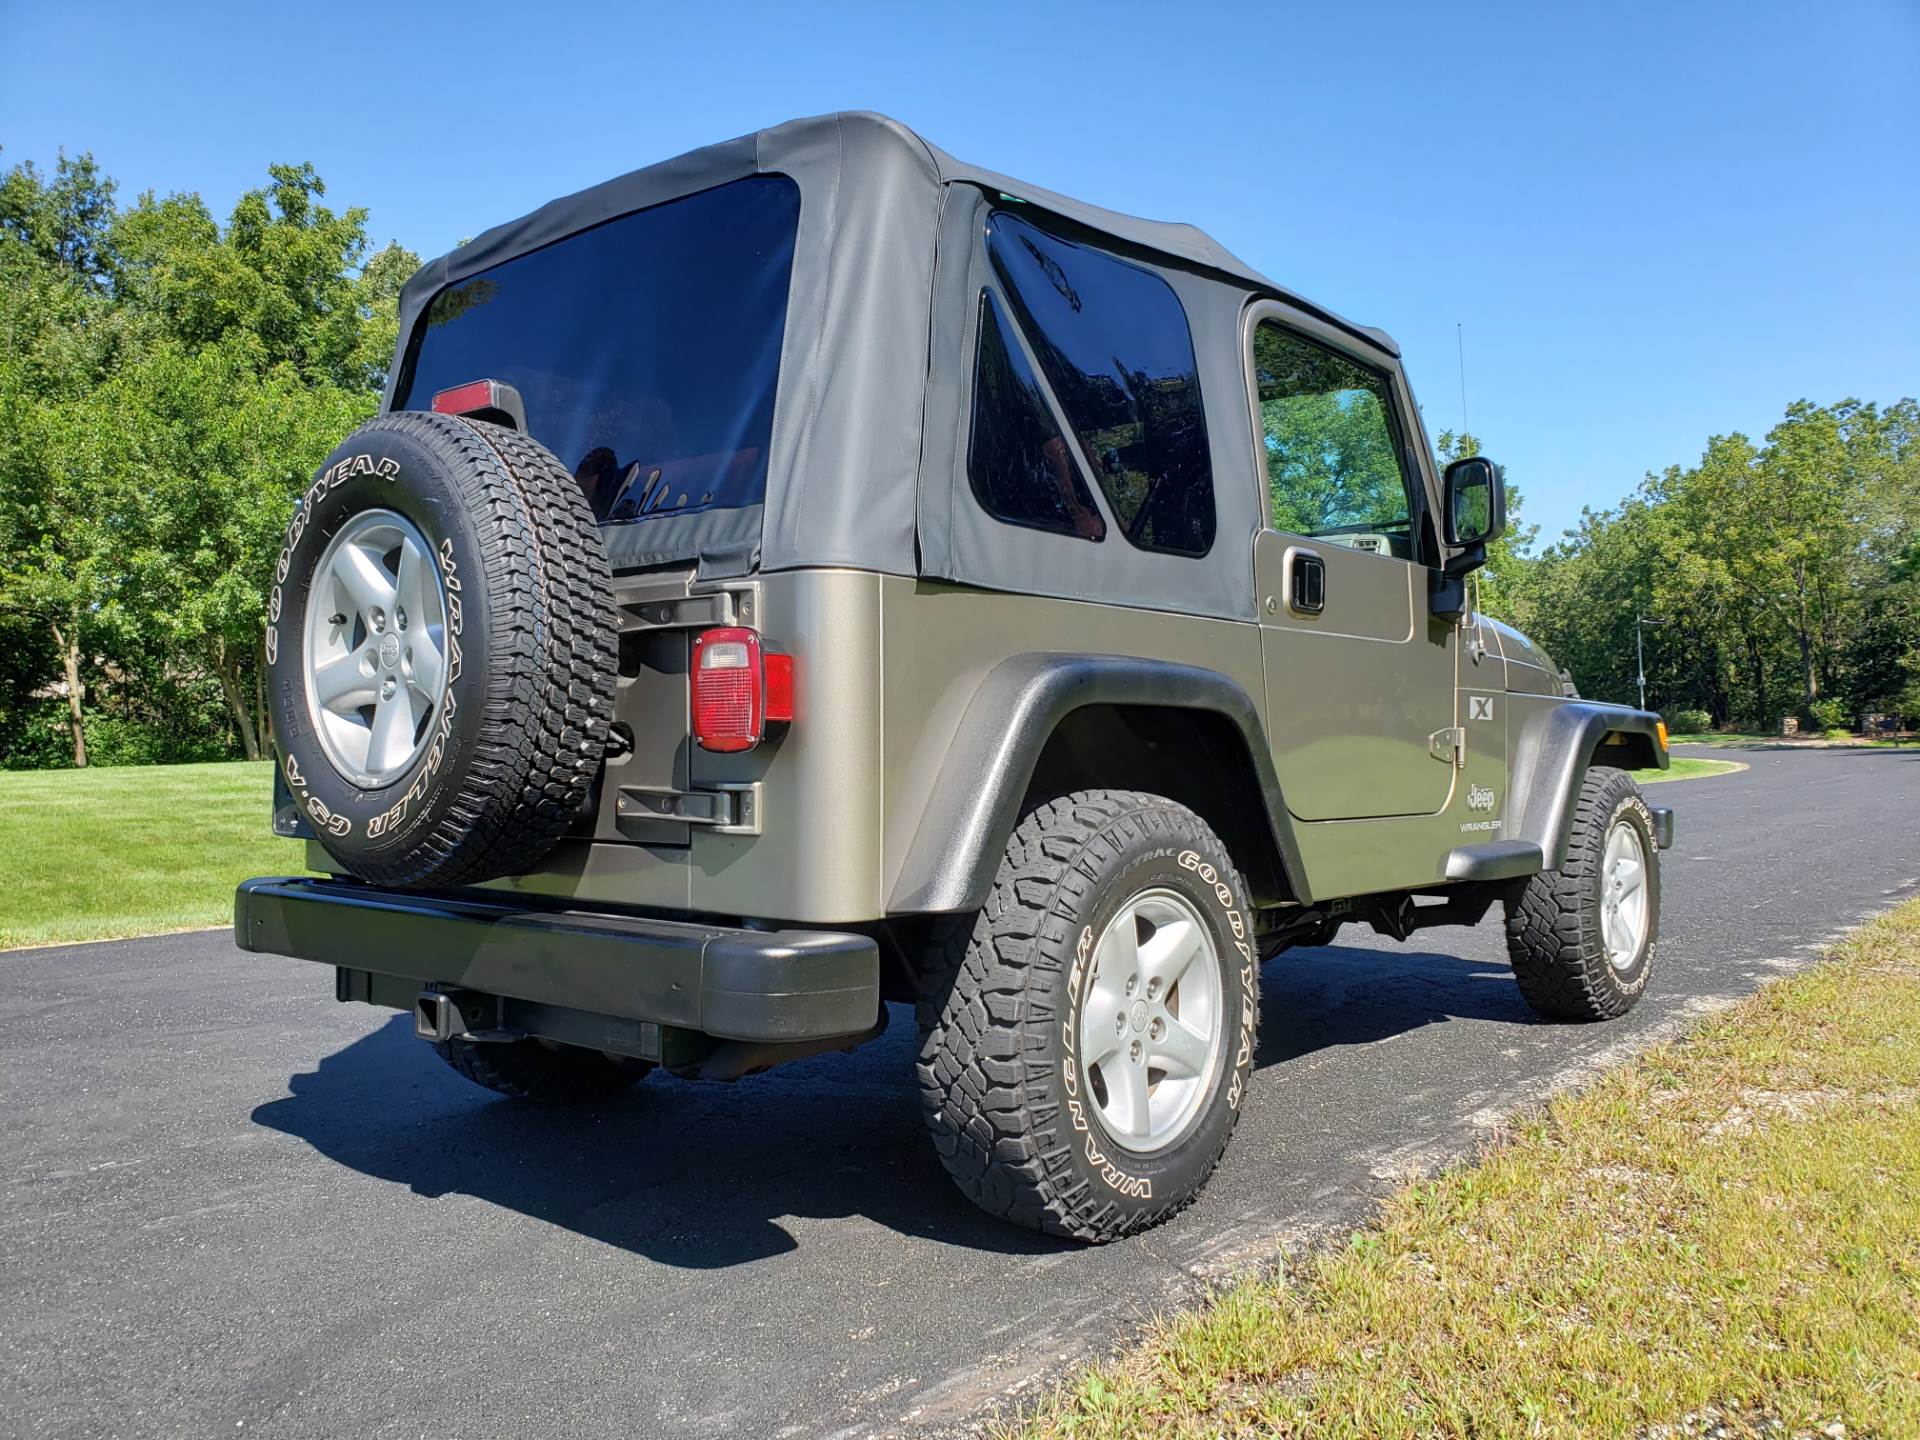 2003 Jeep Wrangler X 4WD 2dr SUV in Big Bend, Wisconsin - Photo 17